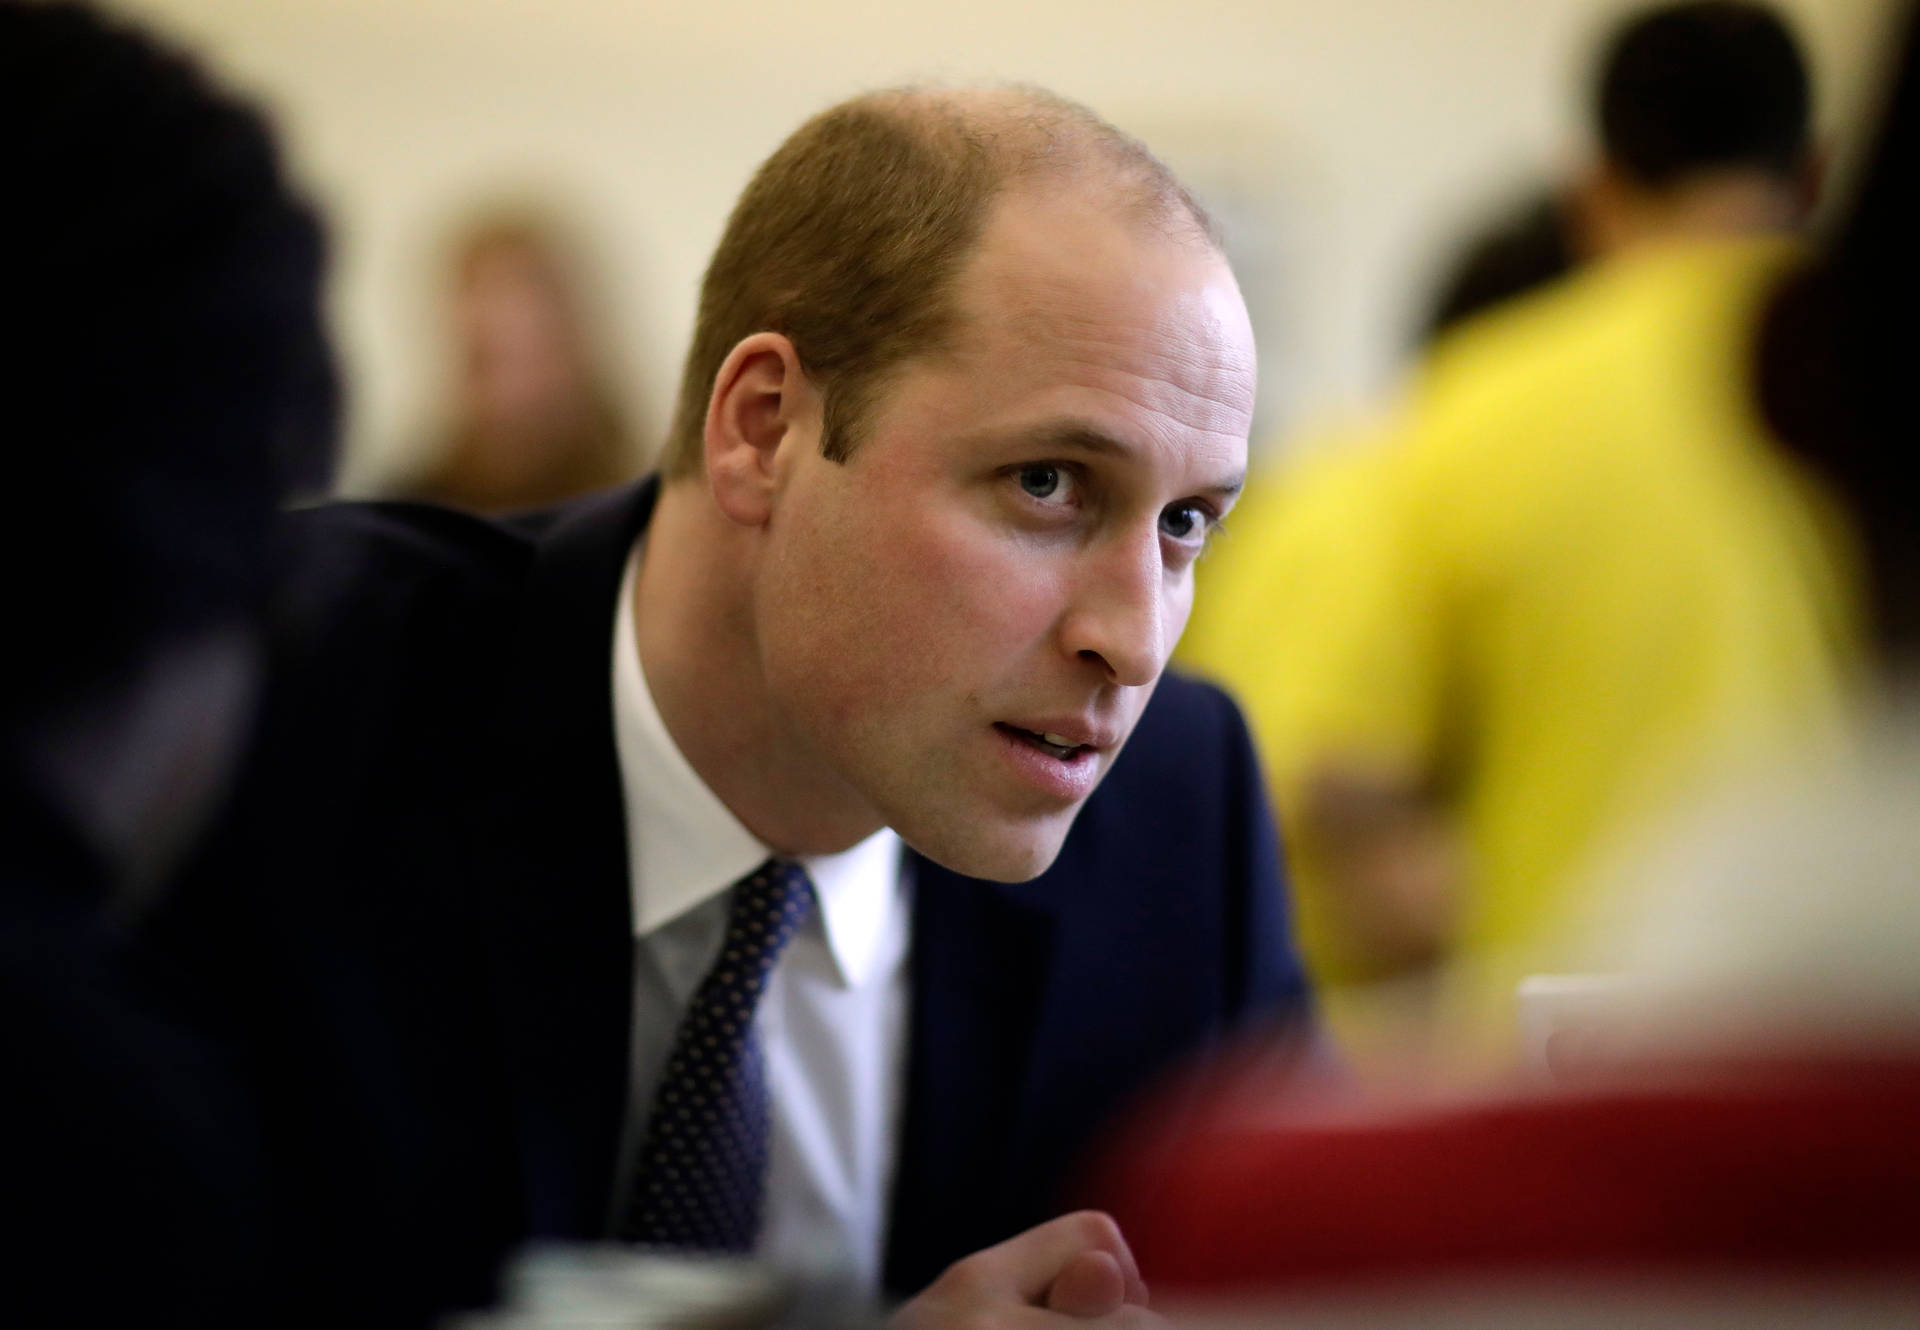 Prince William Engages Sincerely In A Conversation